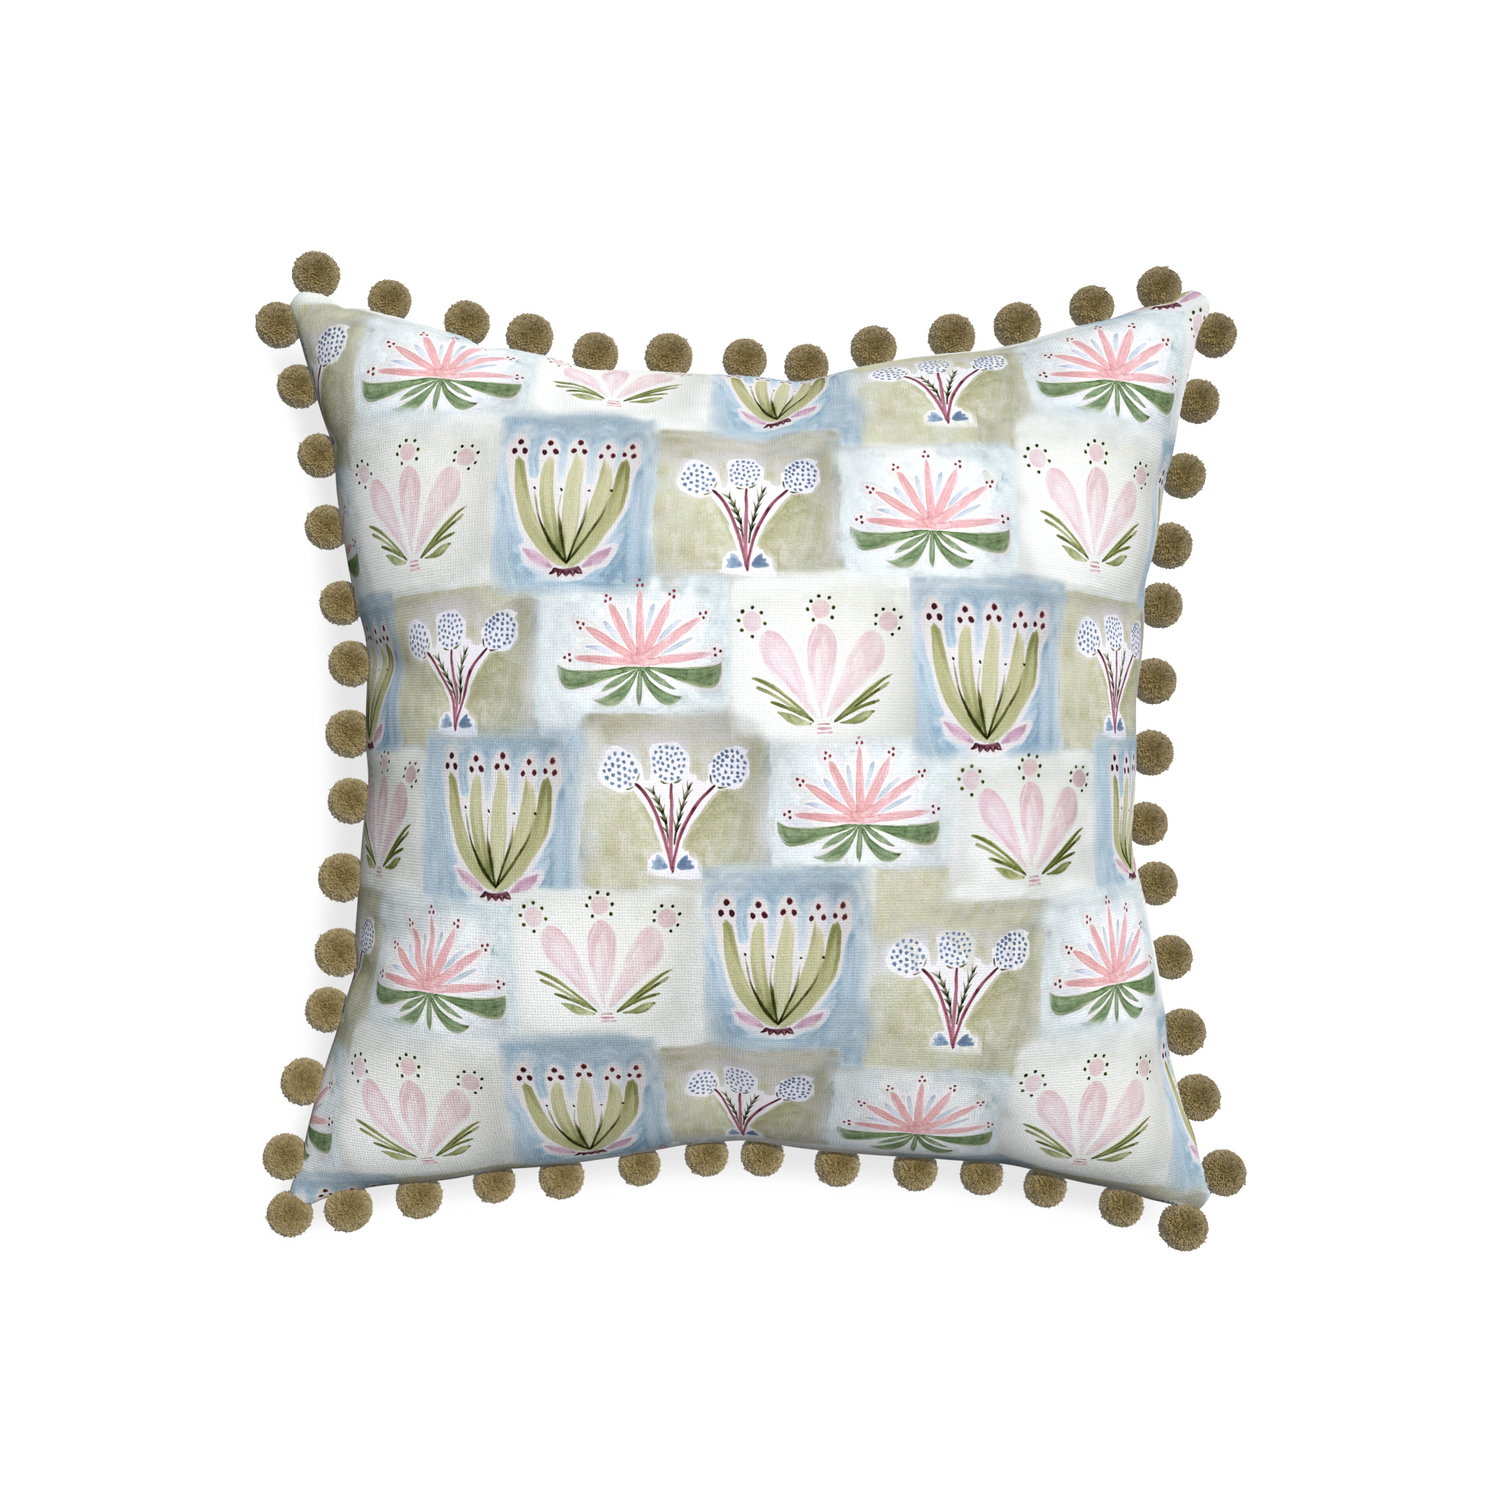 20-square harper custom hand-painted floralpillow with olive pom pom on white background